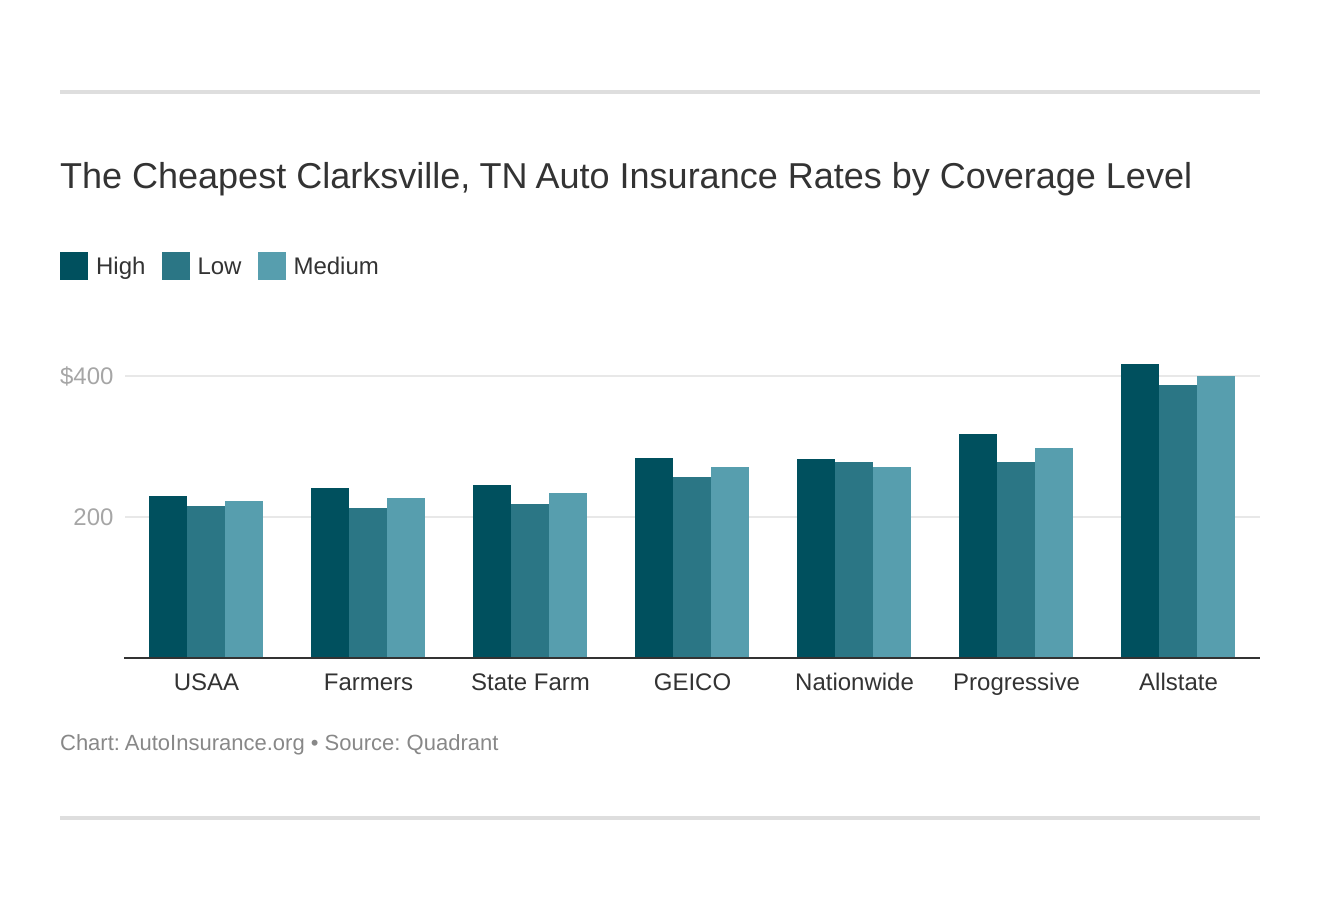 The Cheapest Clarksville, TN Auto Insurance Rates by Coverage Level